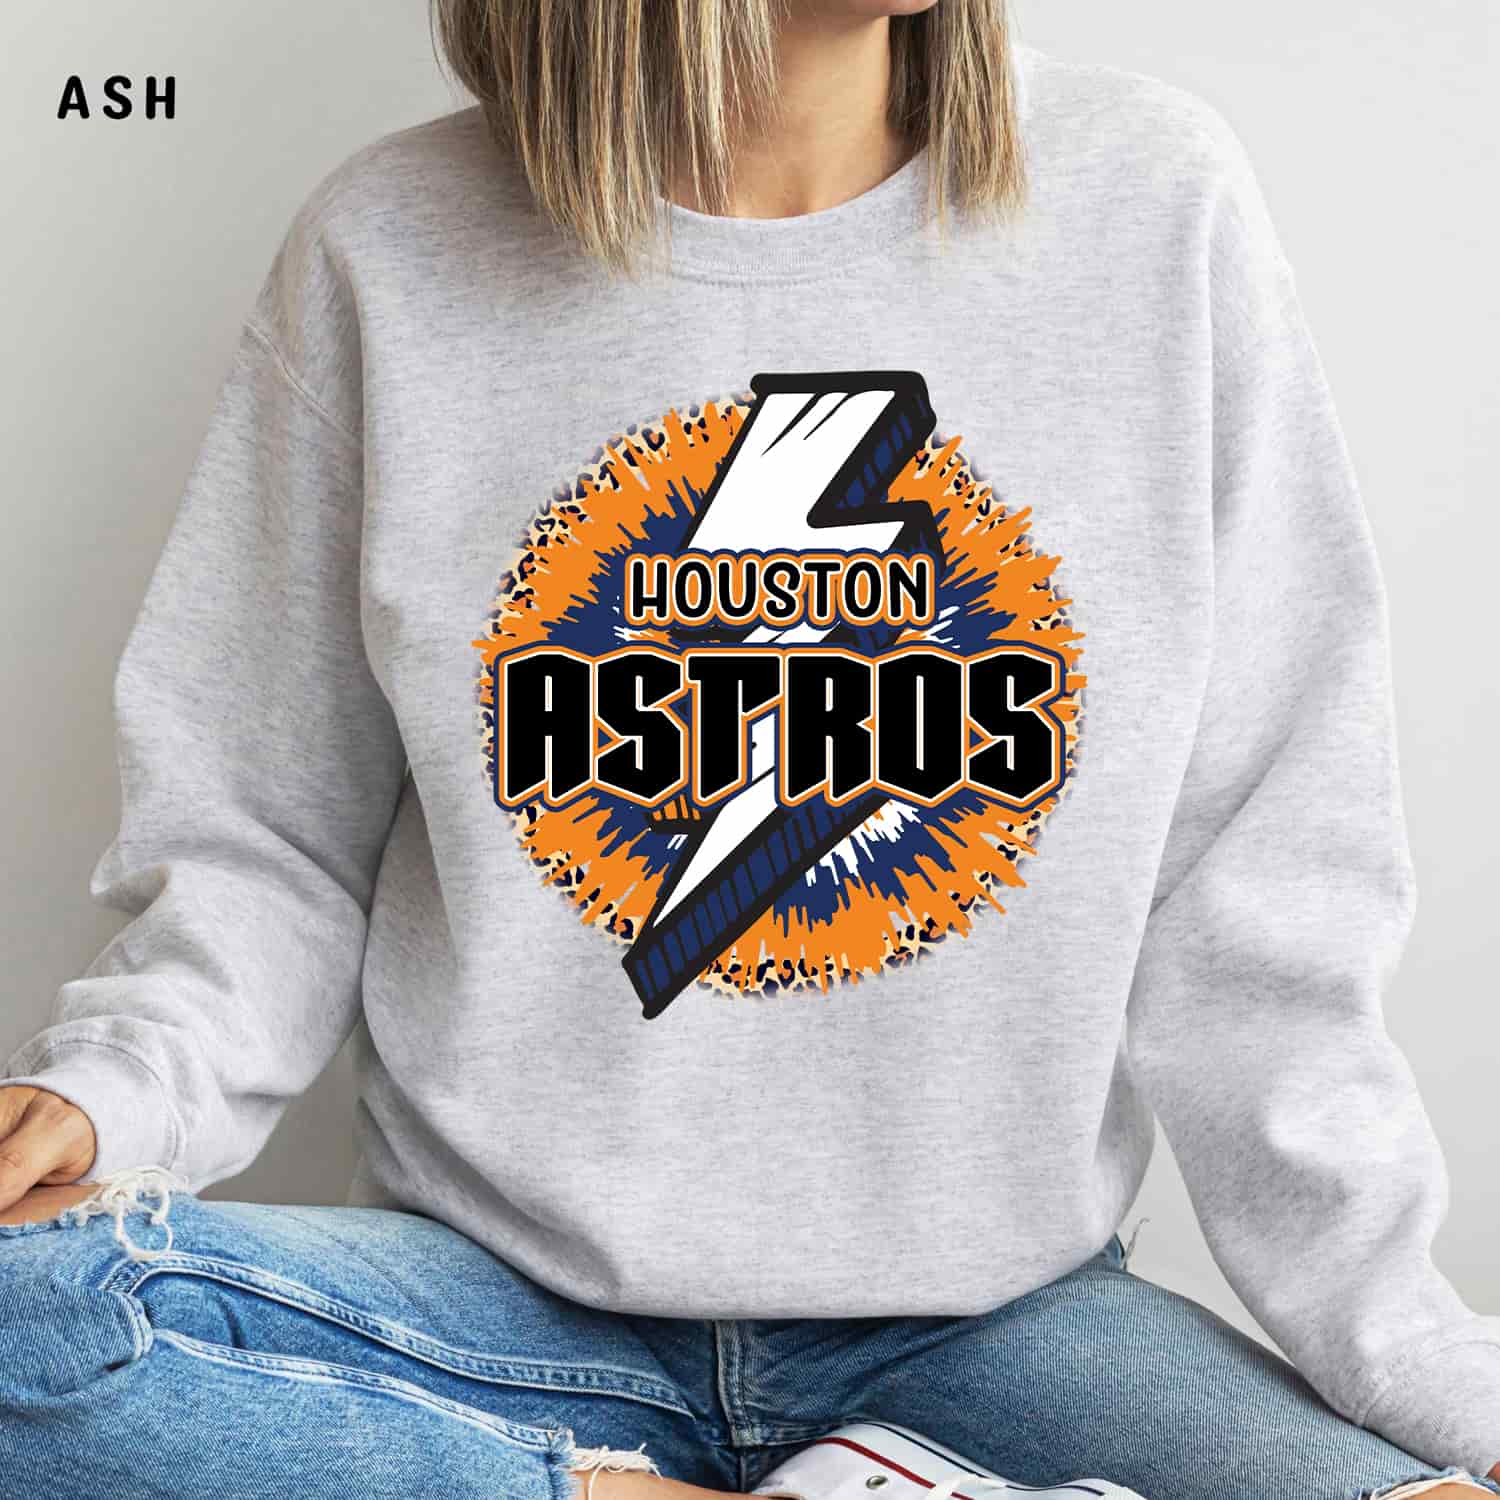 Houston Astros Shirt Women Once Upon A Time There Was A Lady Who Really  Loved Her Astros Gift - Personalized Gifts: Family, Sports, Occasions,  Trending